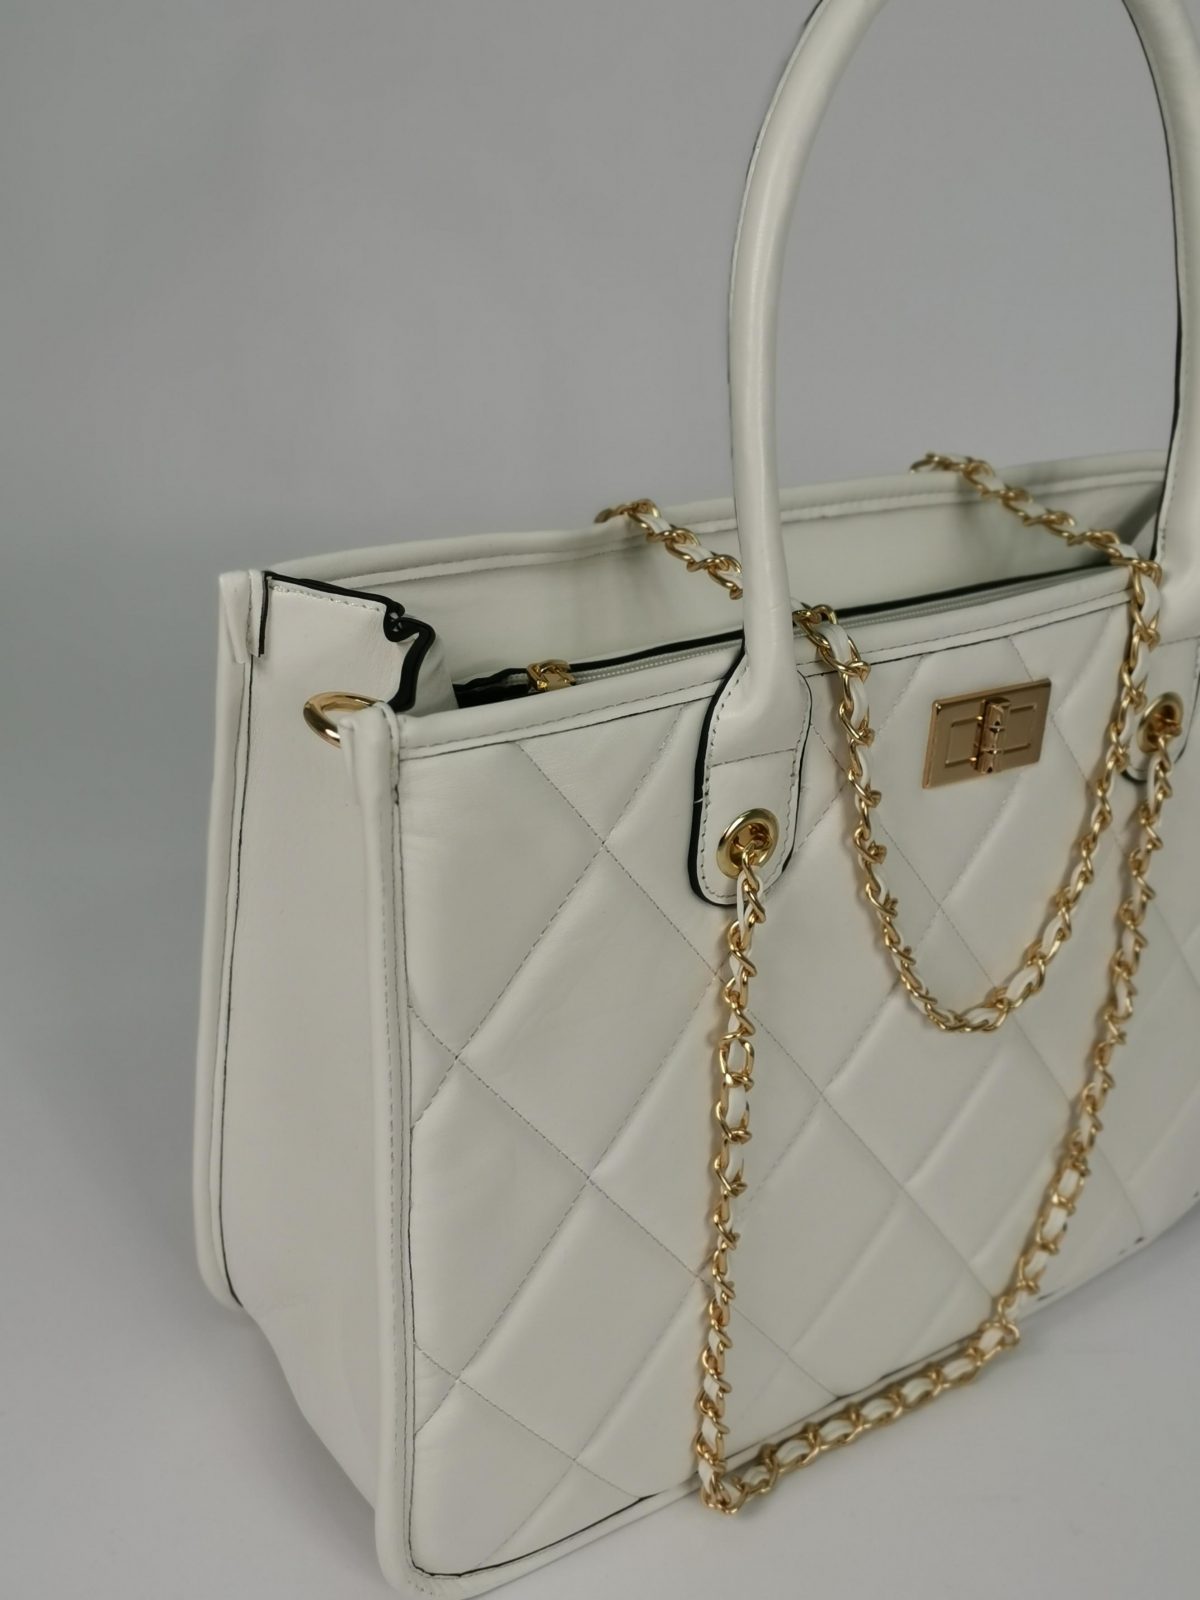 Large handbag in white with gold chain